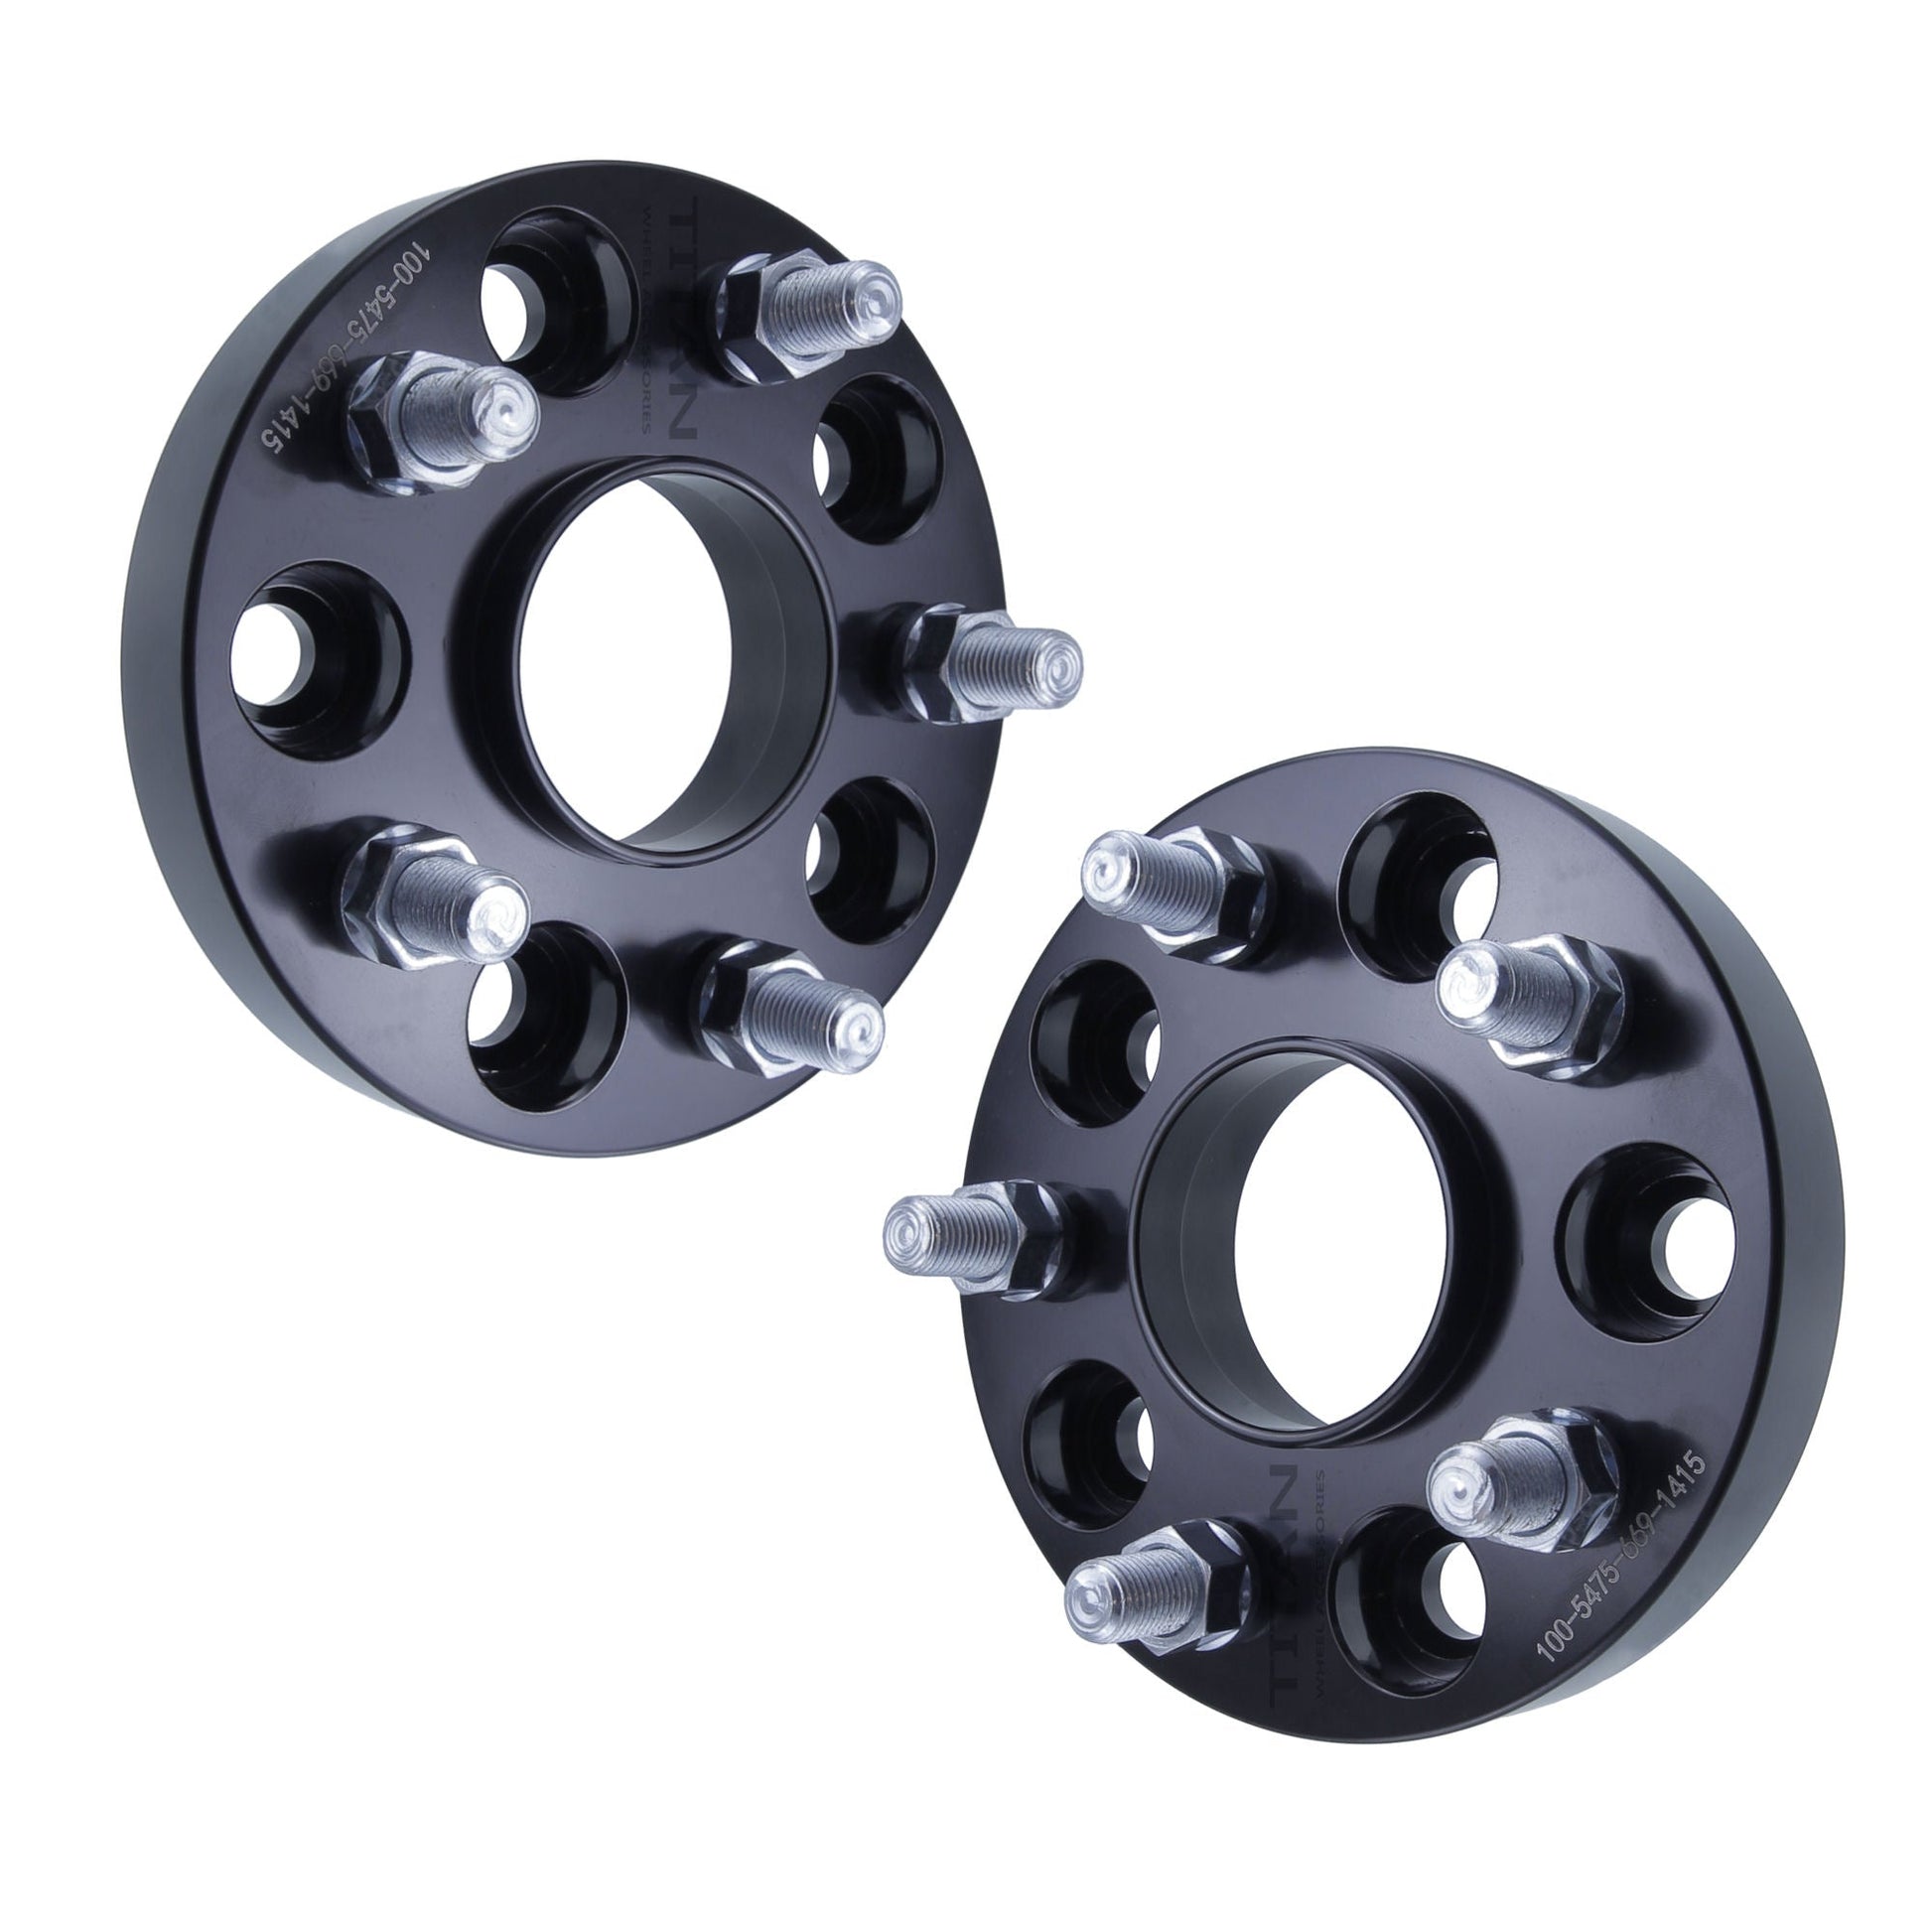 1" (25mm) Titan Wheel Spacers for Chevy Camaro 2011+ | 5x4.75 (5x120) | 66.9 Hubcentric |14x1.5 Studs |  Set of 4 | Titan Wheel Accessories